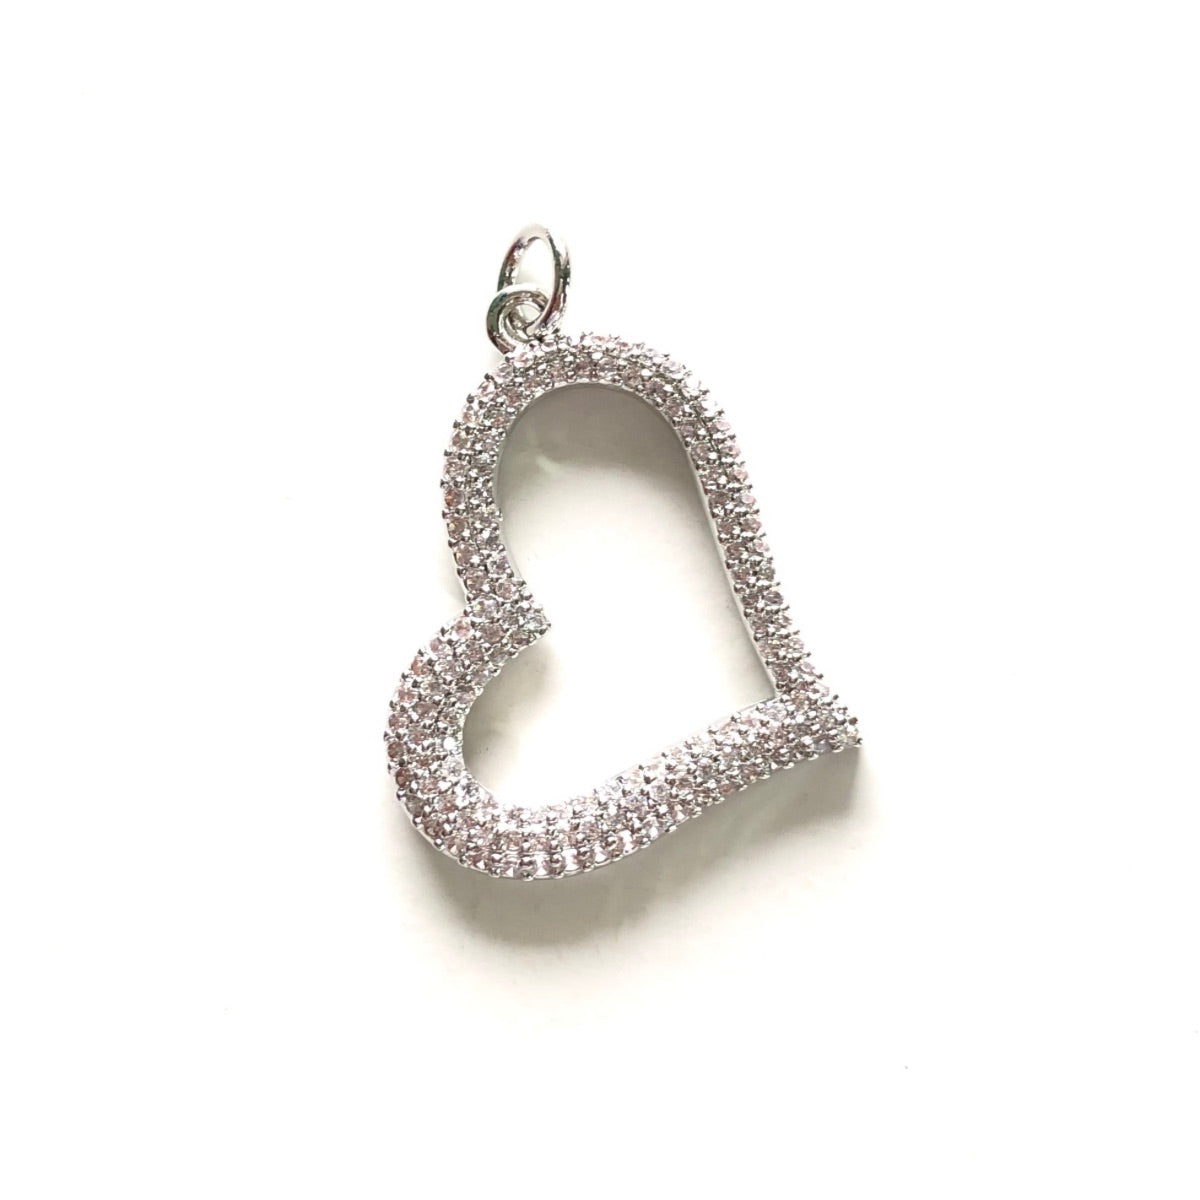 10pcs/lot 30*24mm Micro Zirconia Pave Heart Charm Pendants Silver CZ Paved Charms Hearts Charms Beads Beyond